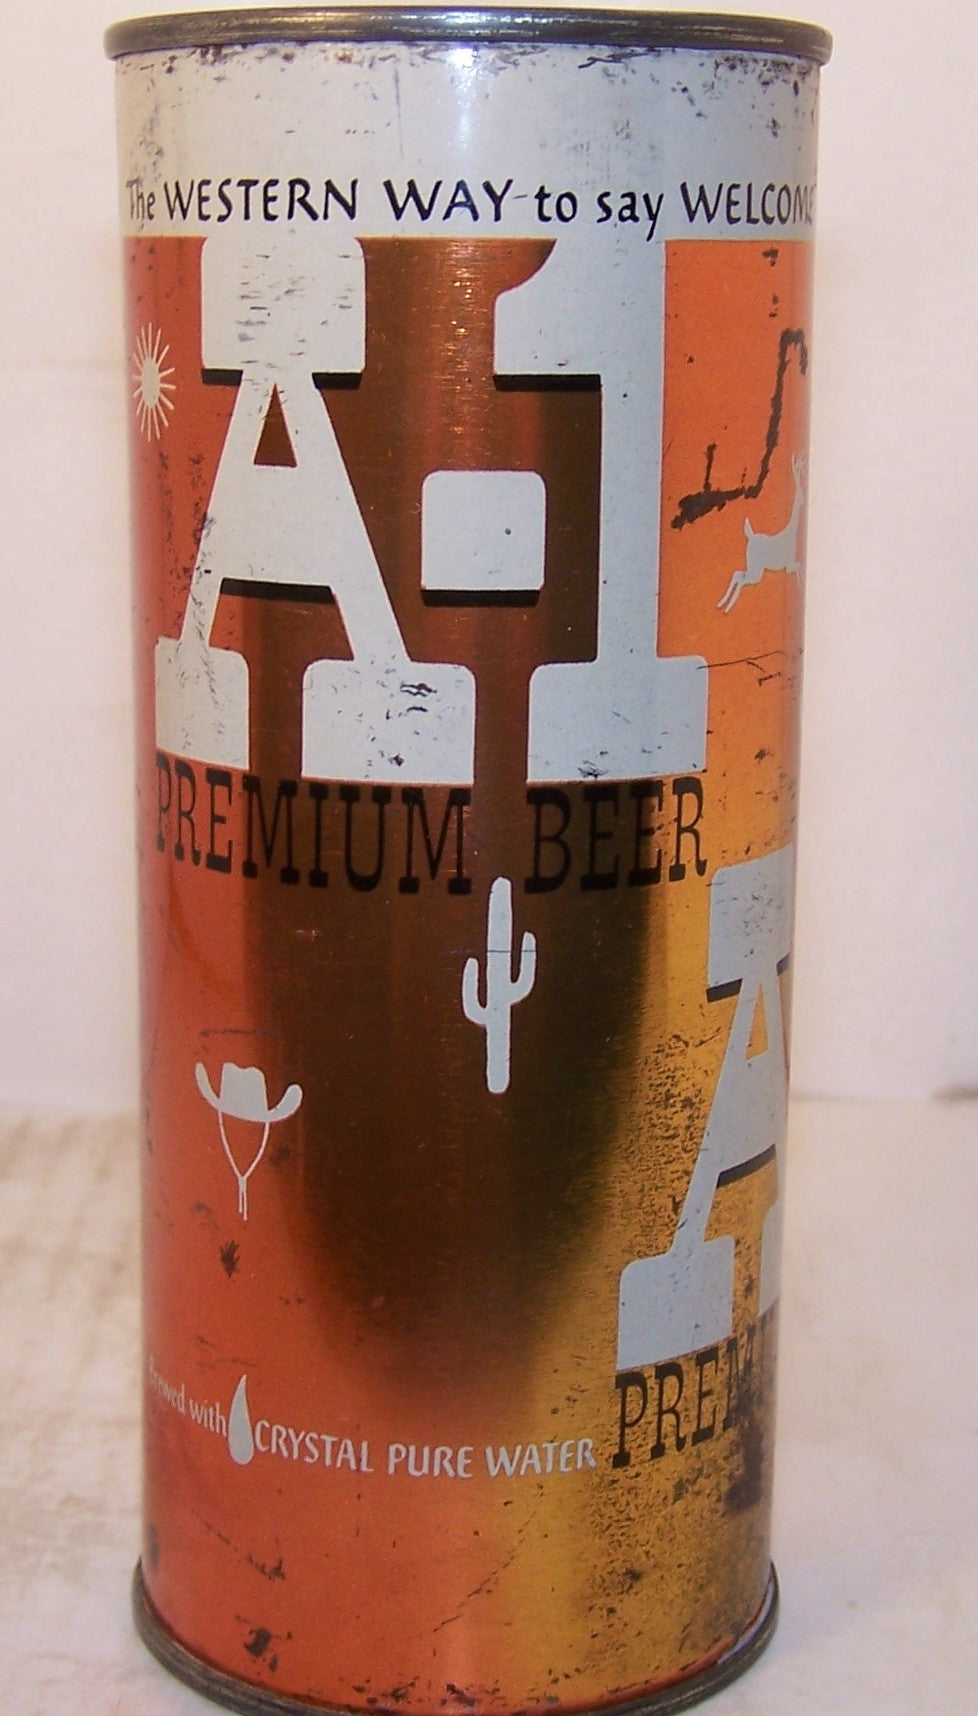 A-1 Premium Beer, USBC 224-13, Grade 2+ Sold on 02/06/17